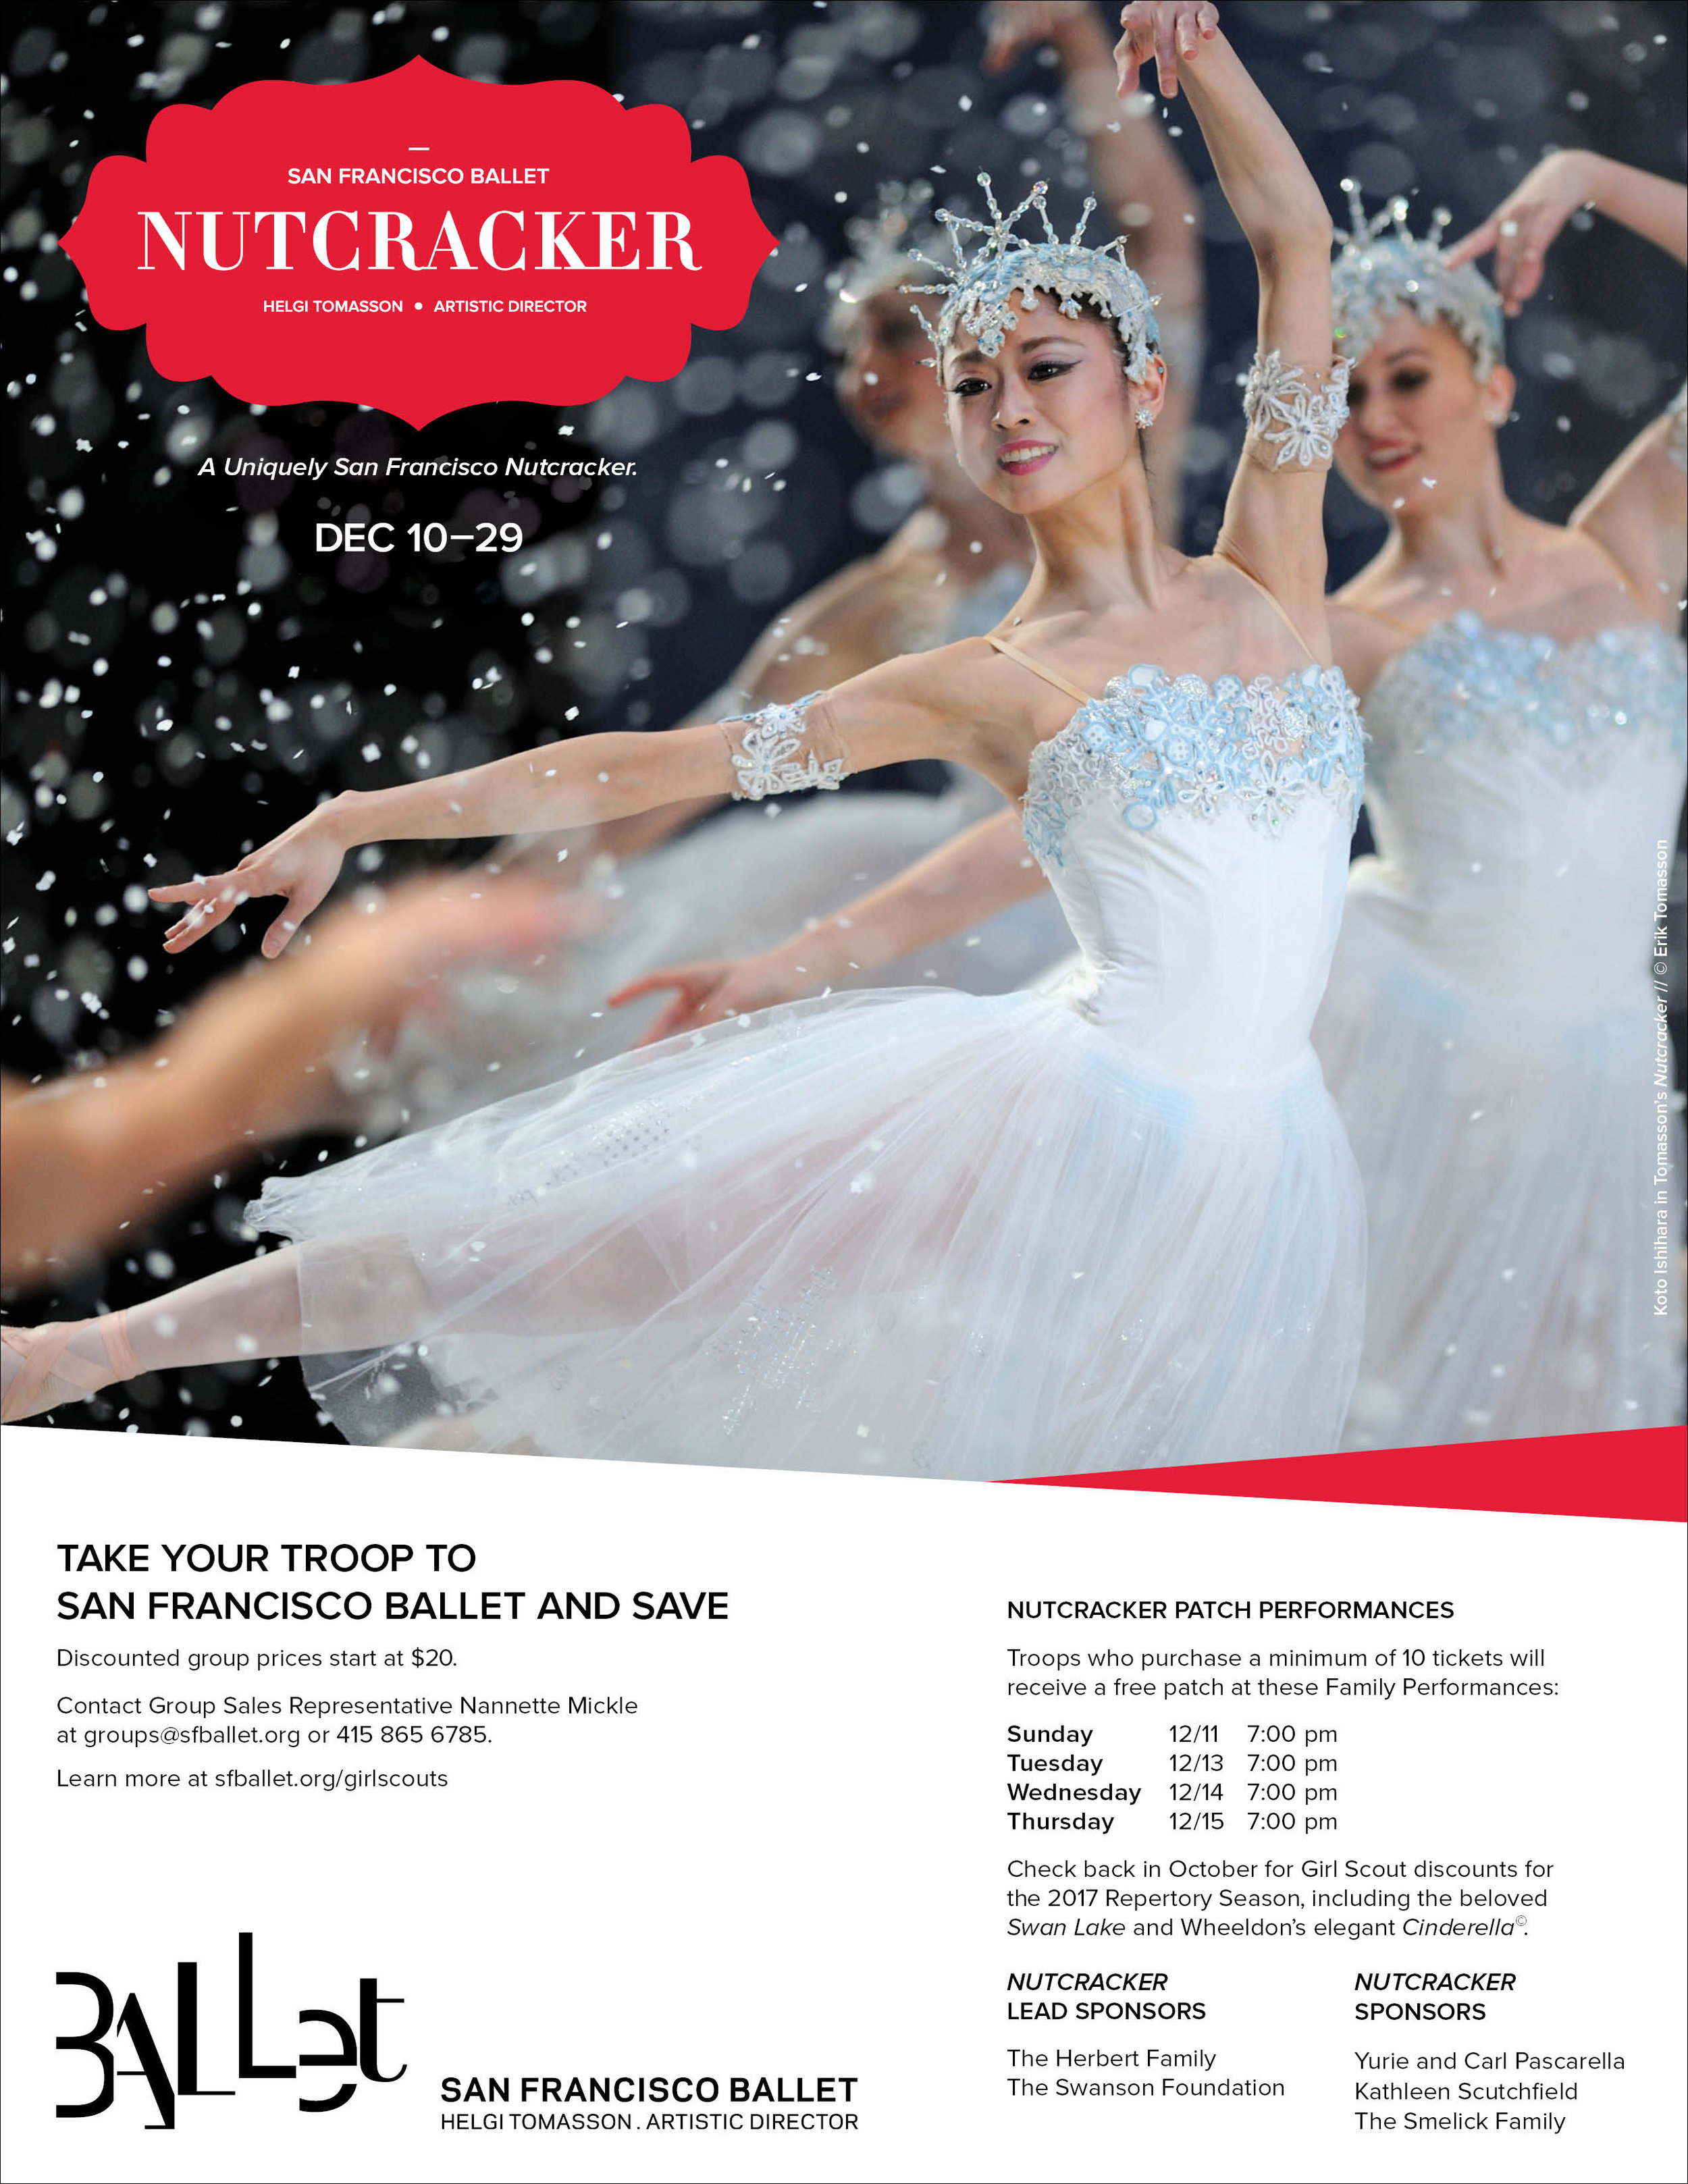  COMPANY: San Francisco Ballet  PROJECT: Corporate Flyer  MY ROLE: Designed layout according to brand guidelines along with the marketing department. Applied minor retouching.&nbsp; 